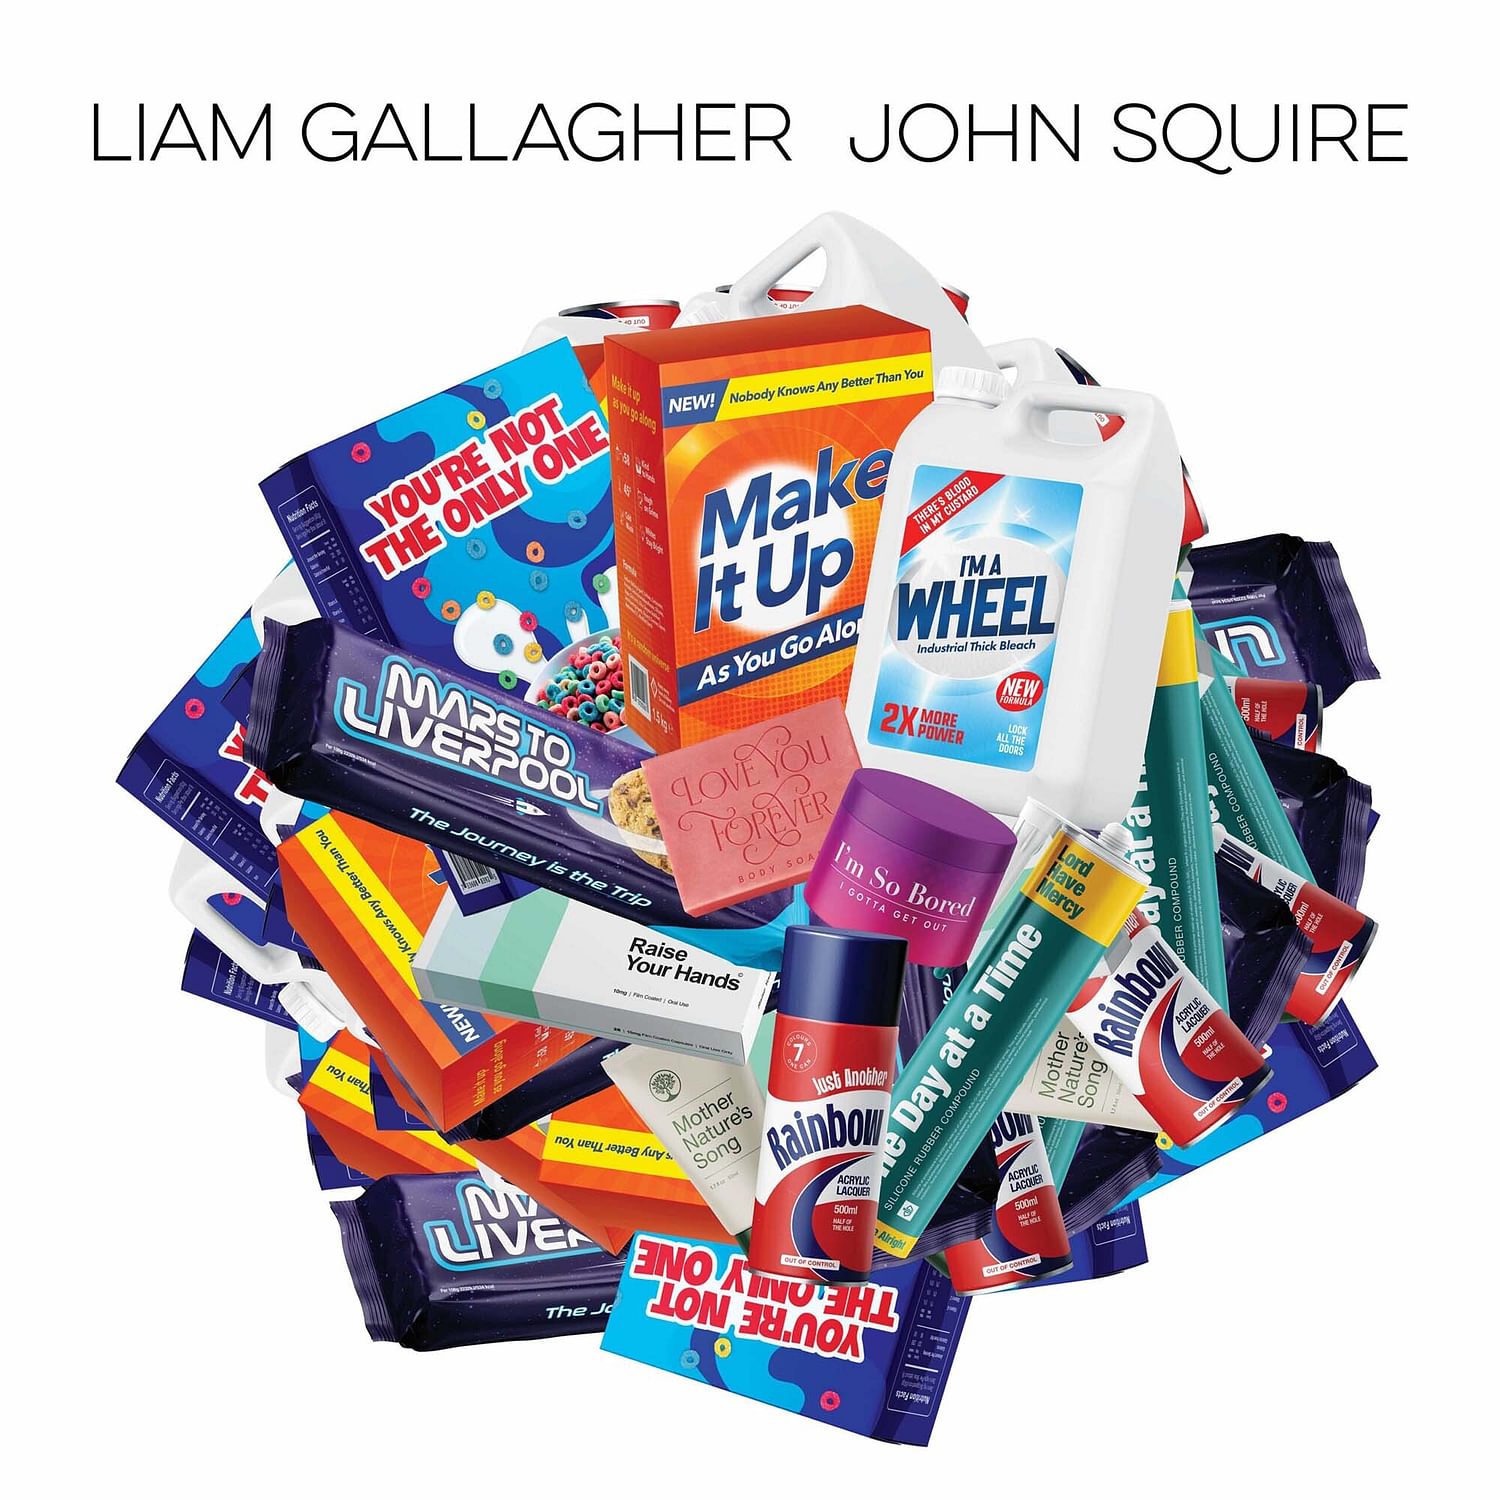 <p><strong>Liam Gallagher and John Squire</strong> - Liam Gallagher & John Squire</p>